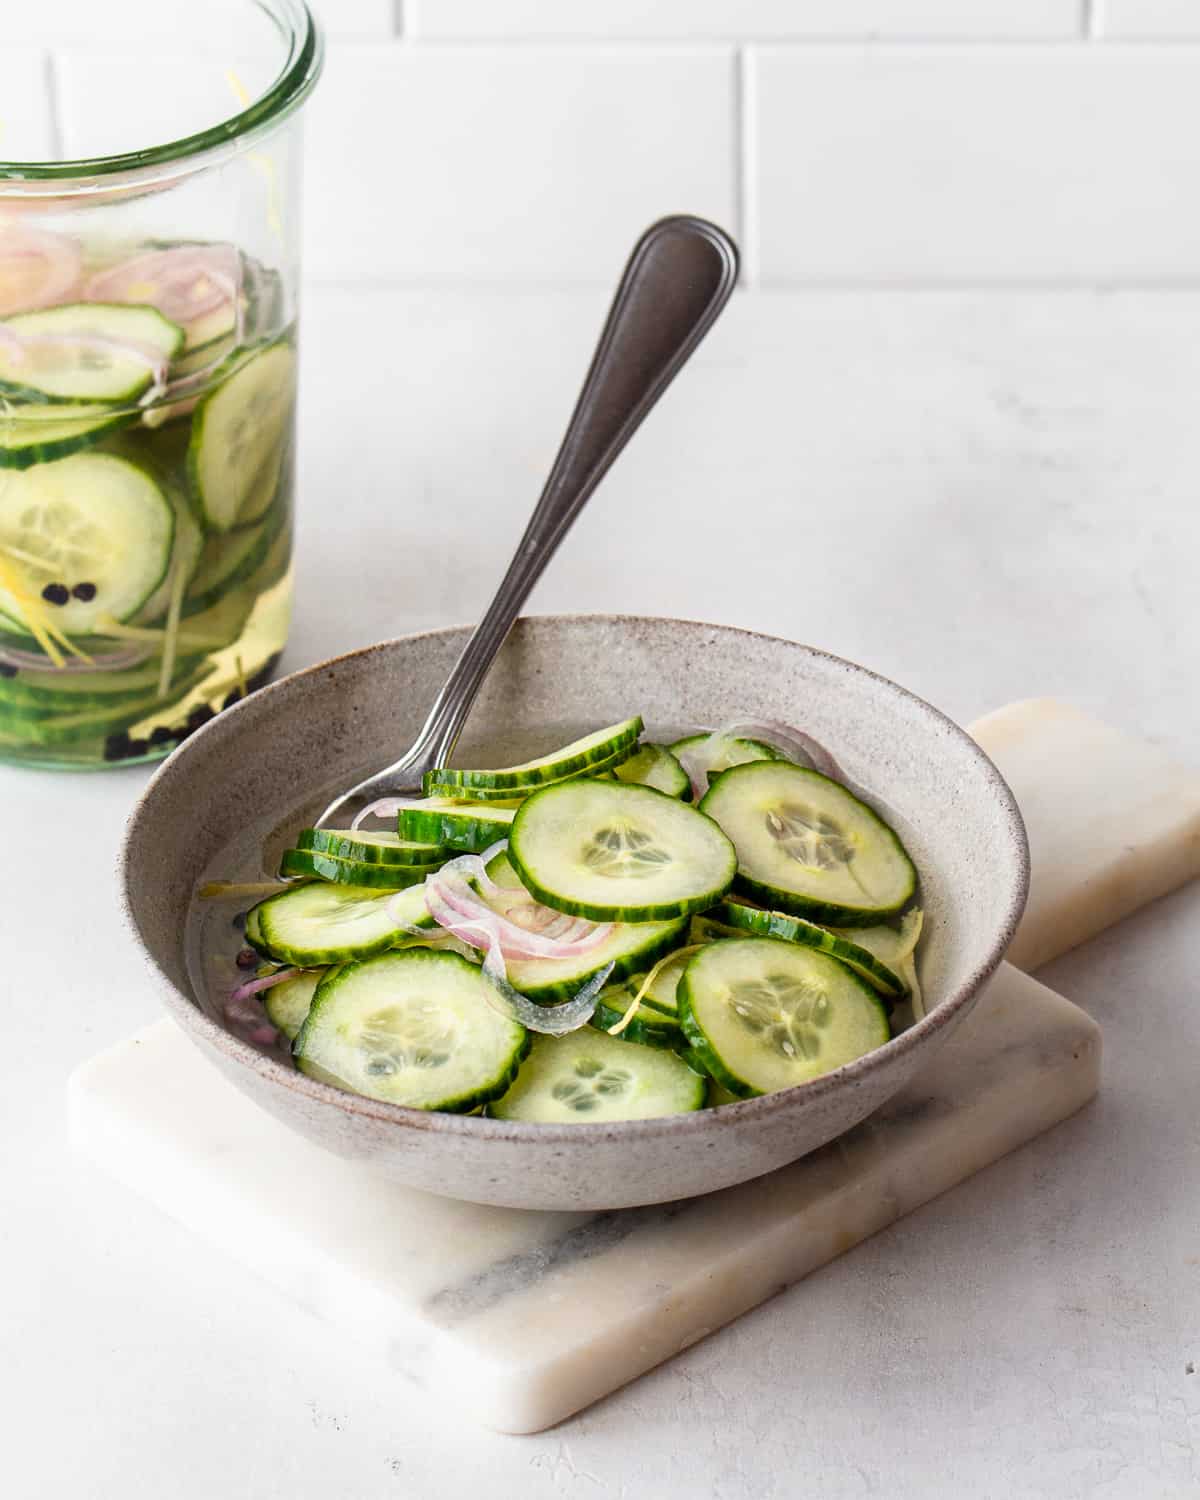 Pickled cucumber salad with shallots and lemon zests in a grey ceramic bowl.